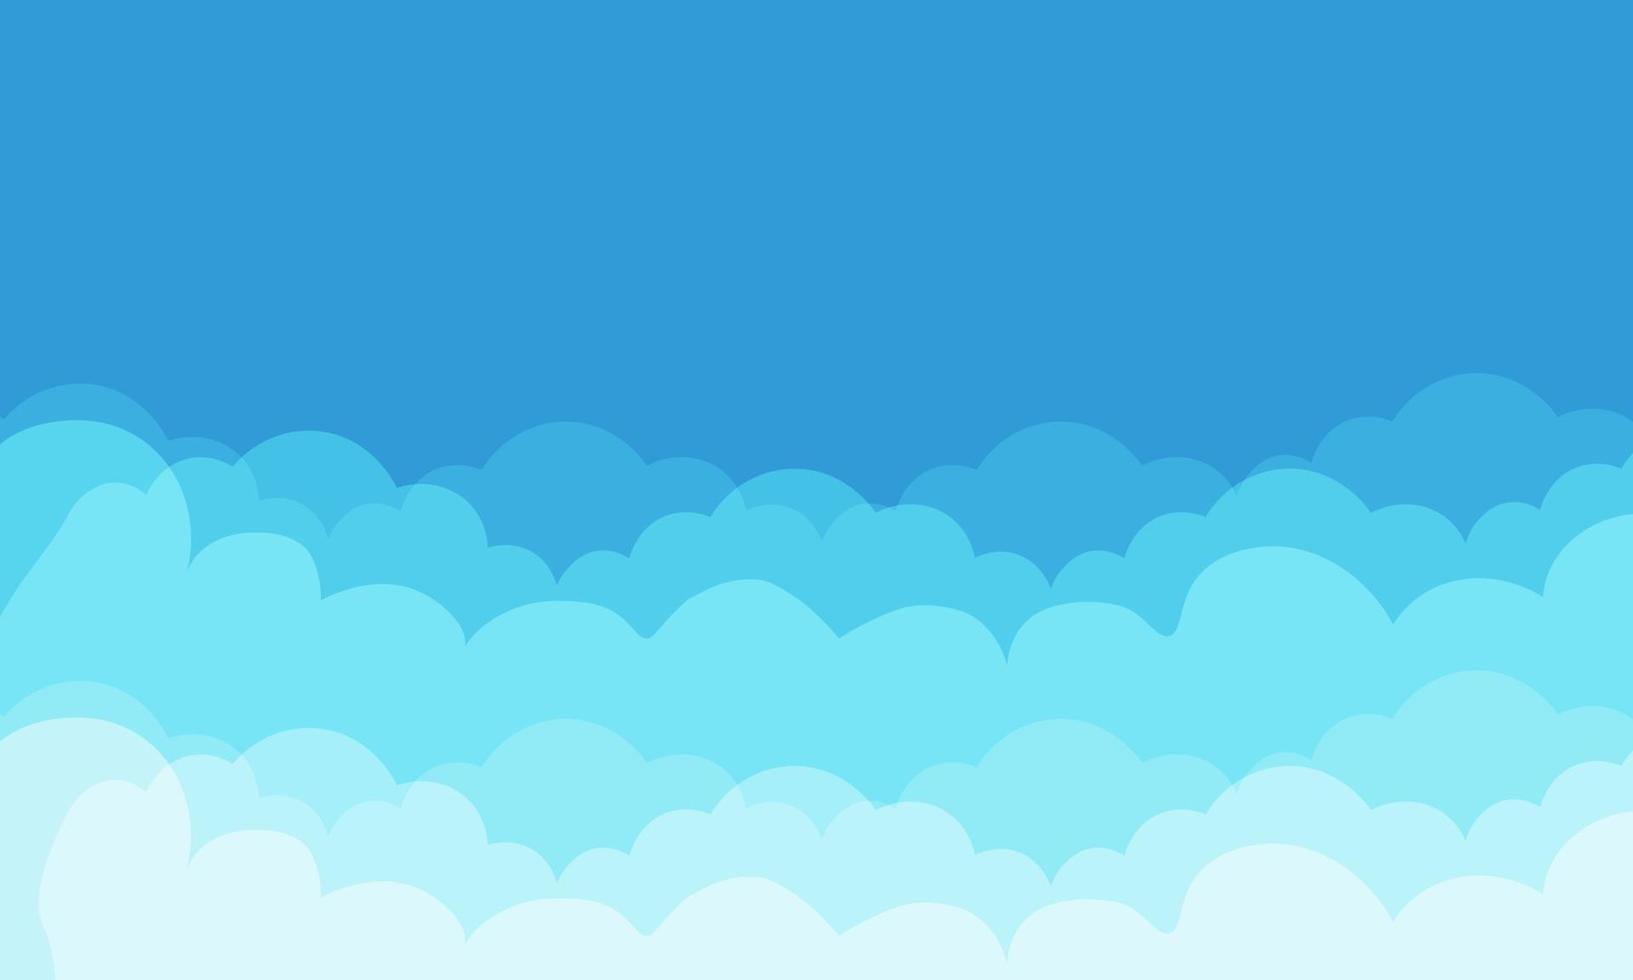 Abstract Blue Cloudy Background Illustration vector